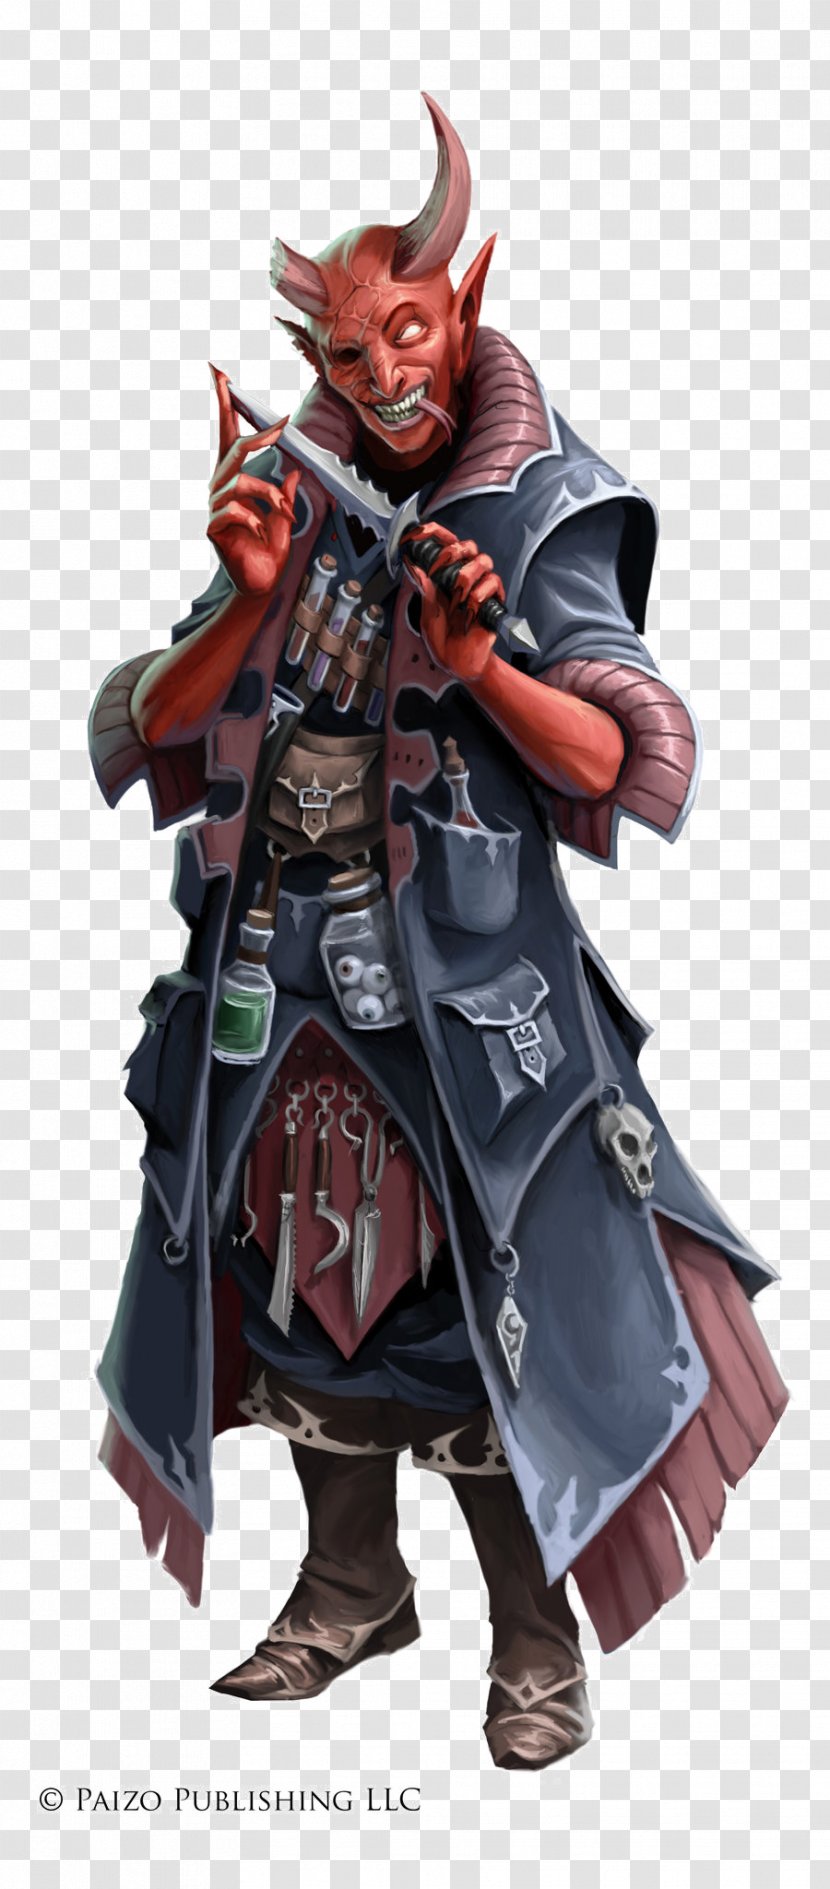 Pathfinder Roleplaying Game D20 System Dungeons & Dragons Tiefling Warlock - Wizard - Gnome Transparent PNG